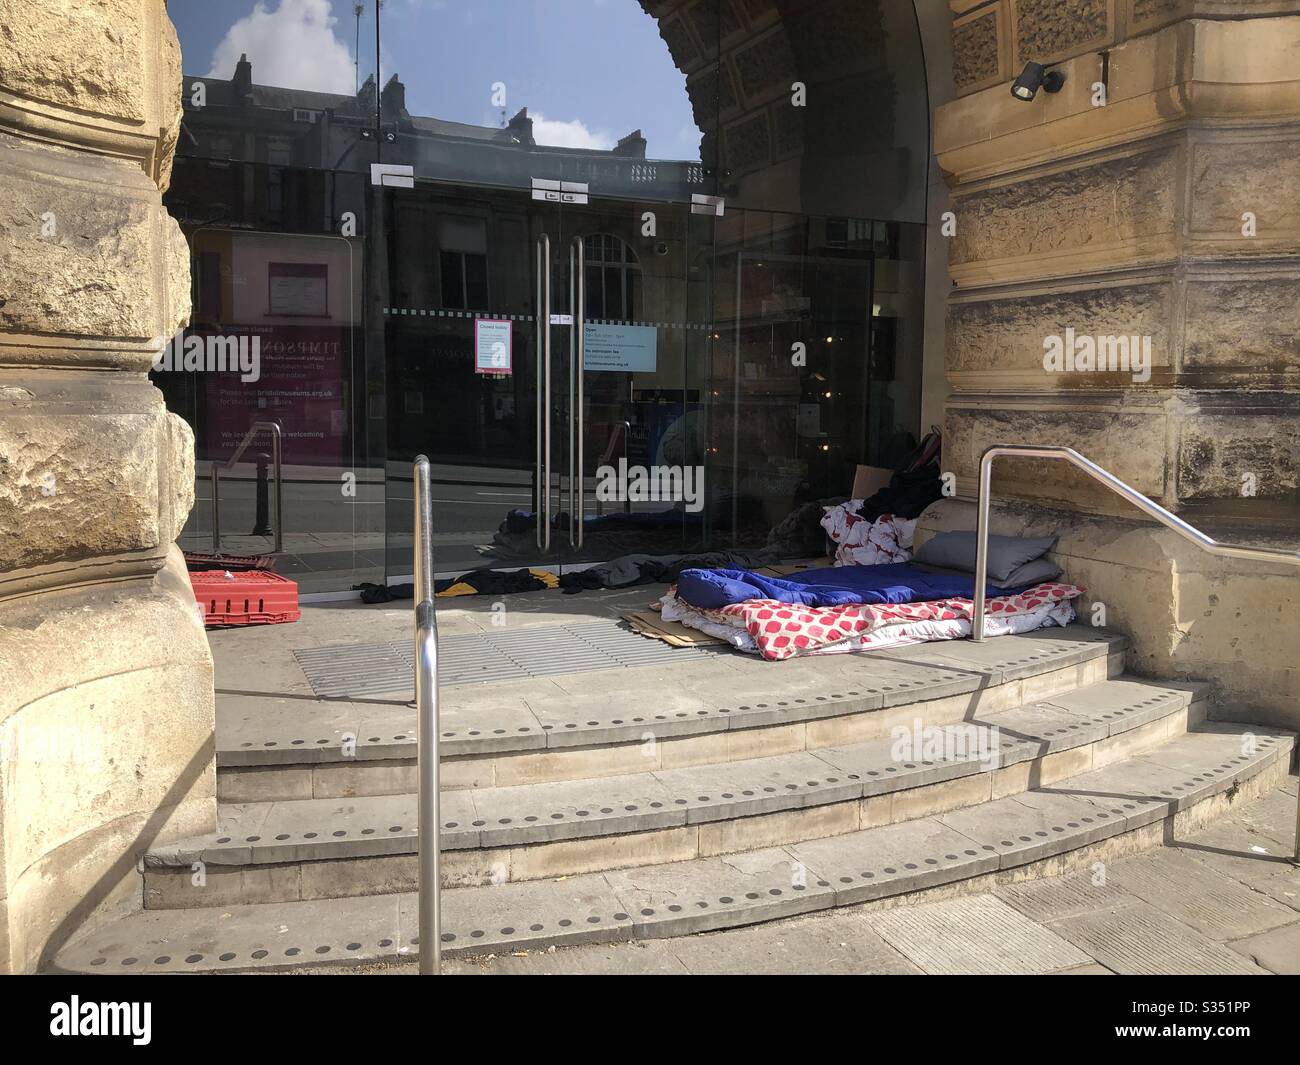 Sleeping bags and other items on the steps of Bristol City Museum during the coronavirus lockdown in the UK Stock Photo